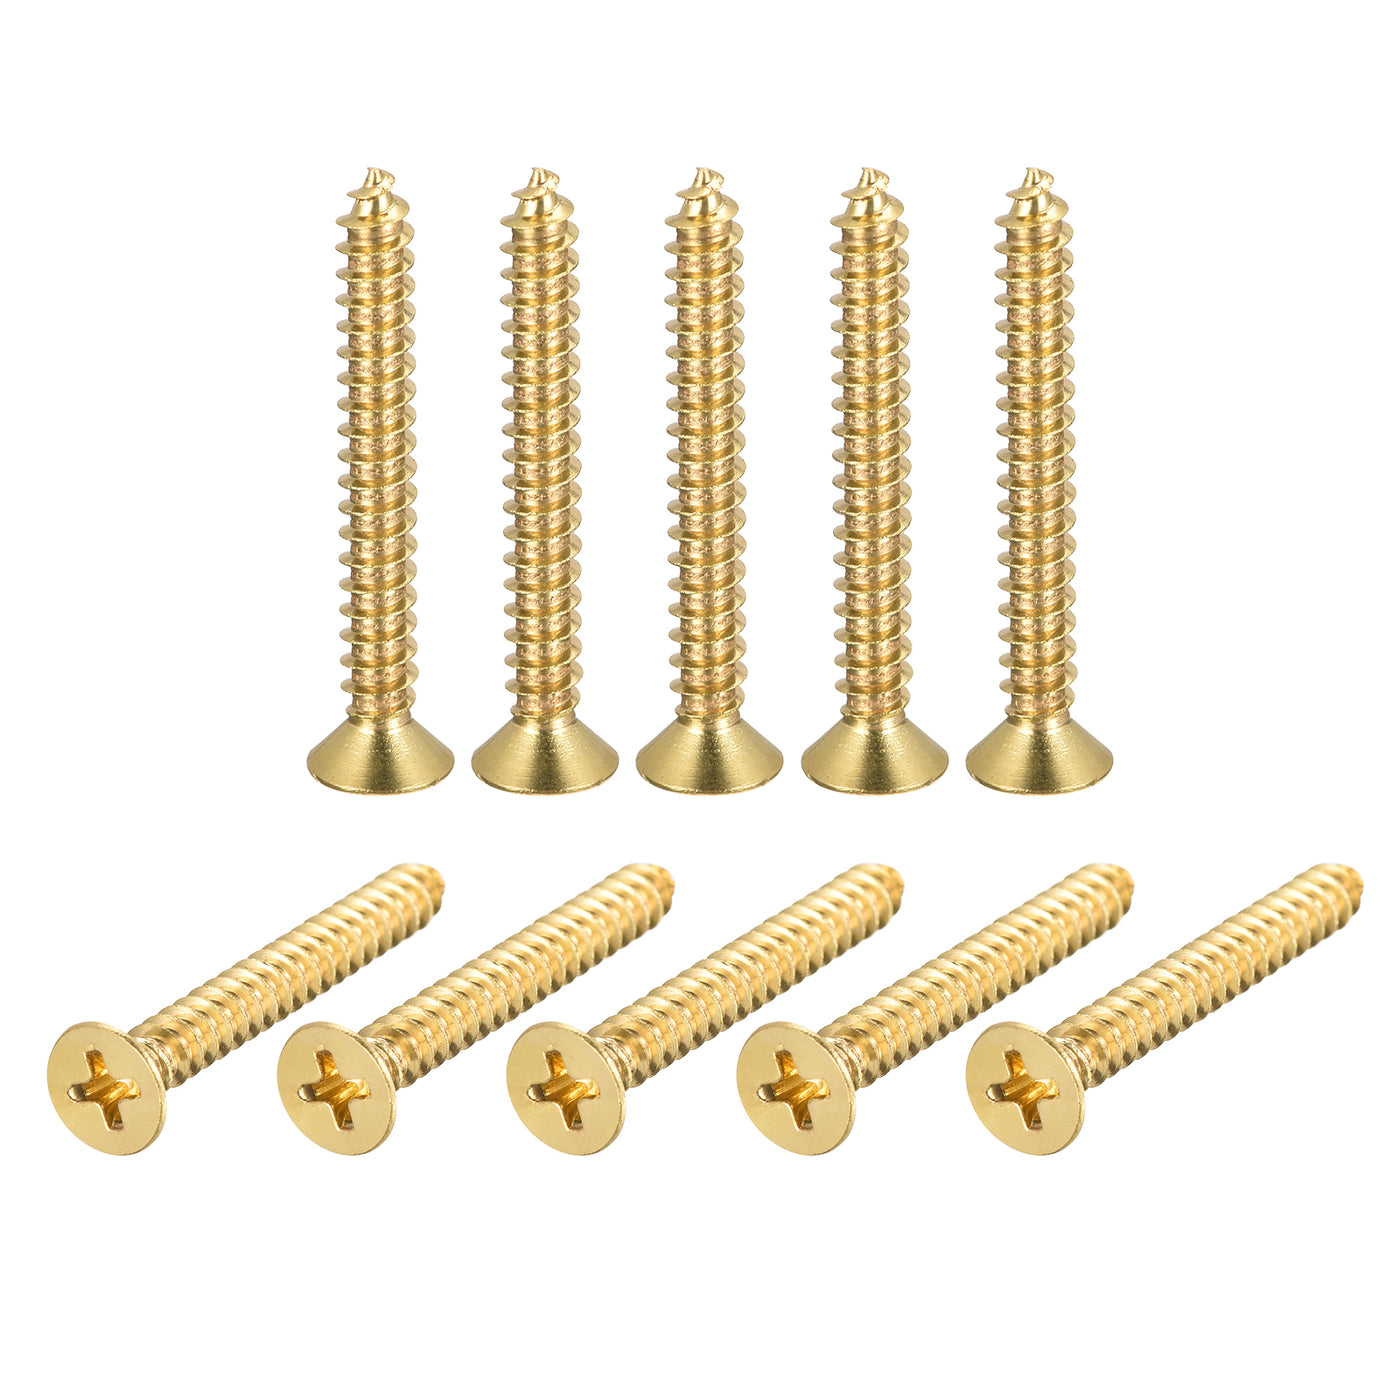 uxcell Uxcell Brass Wood Screws, M5x40mm Phillips Flat Head Self Tapping Connector for Door Hinges, Wooden Furniture, Home Appliances 20Pcs